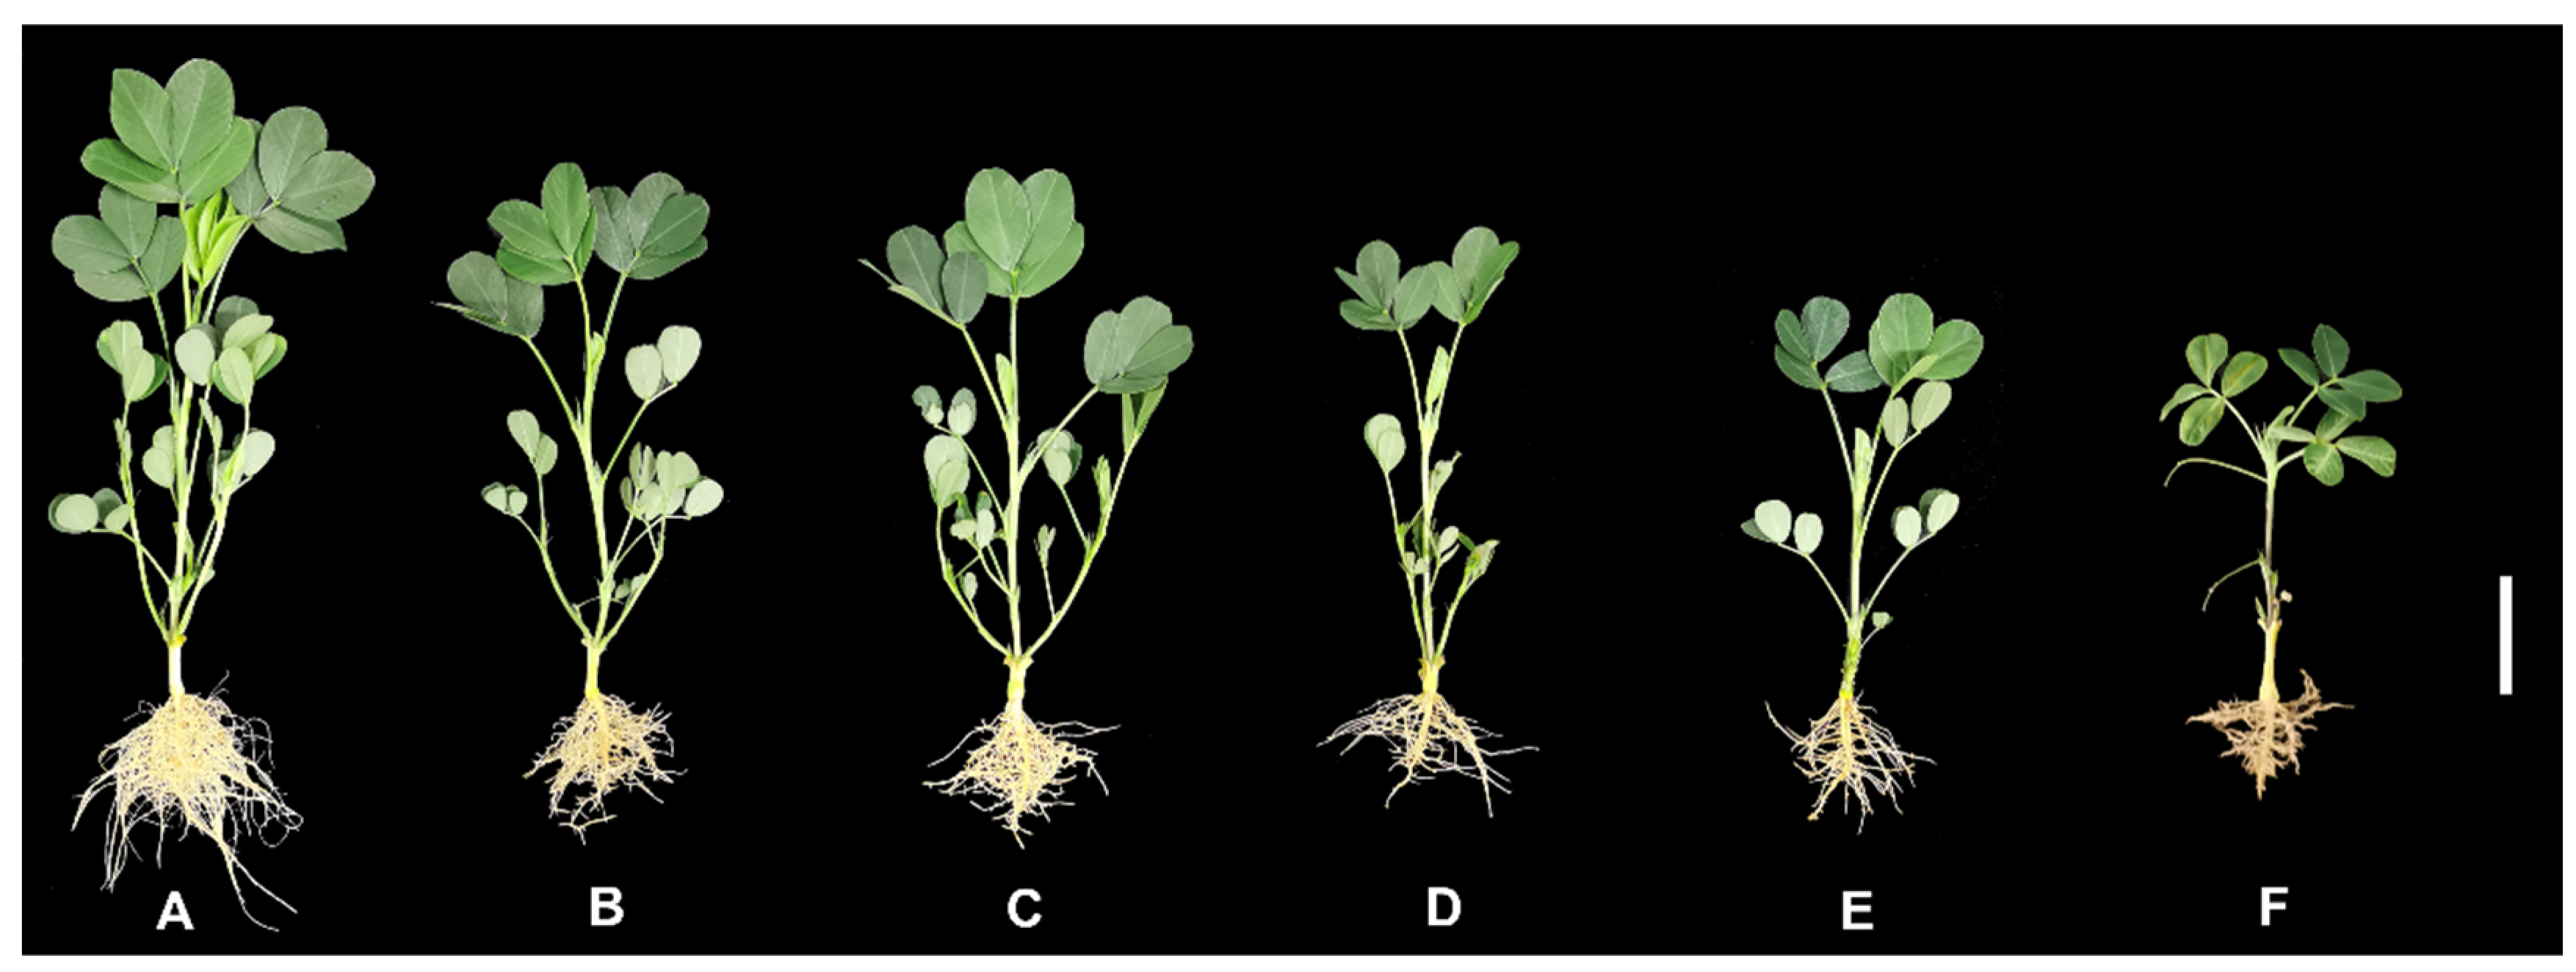 Plant Growth and Development of Peanuts